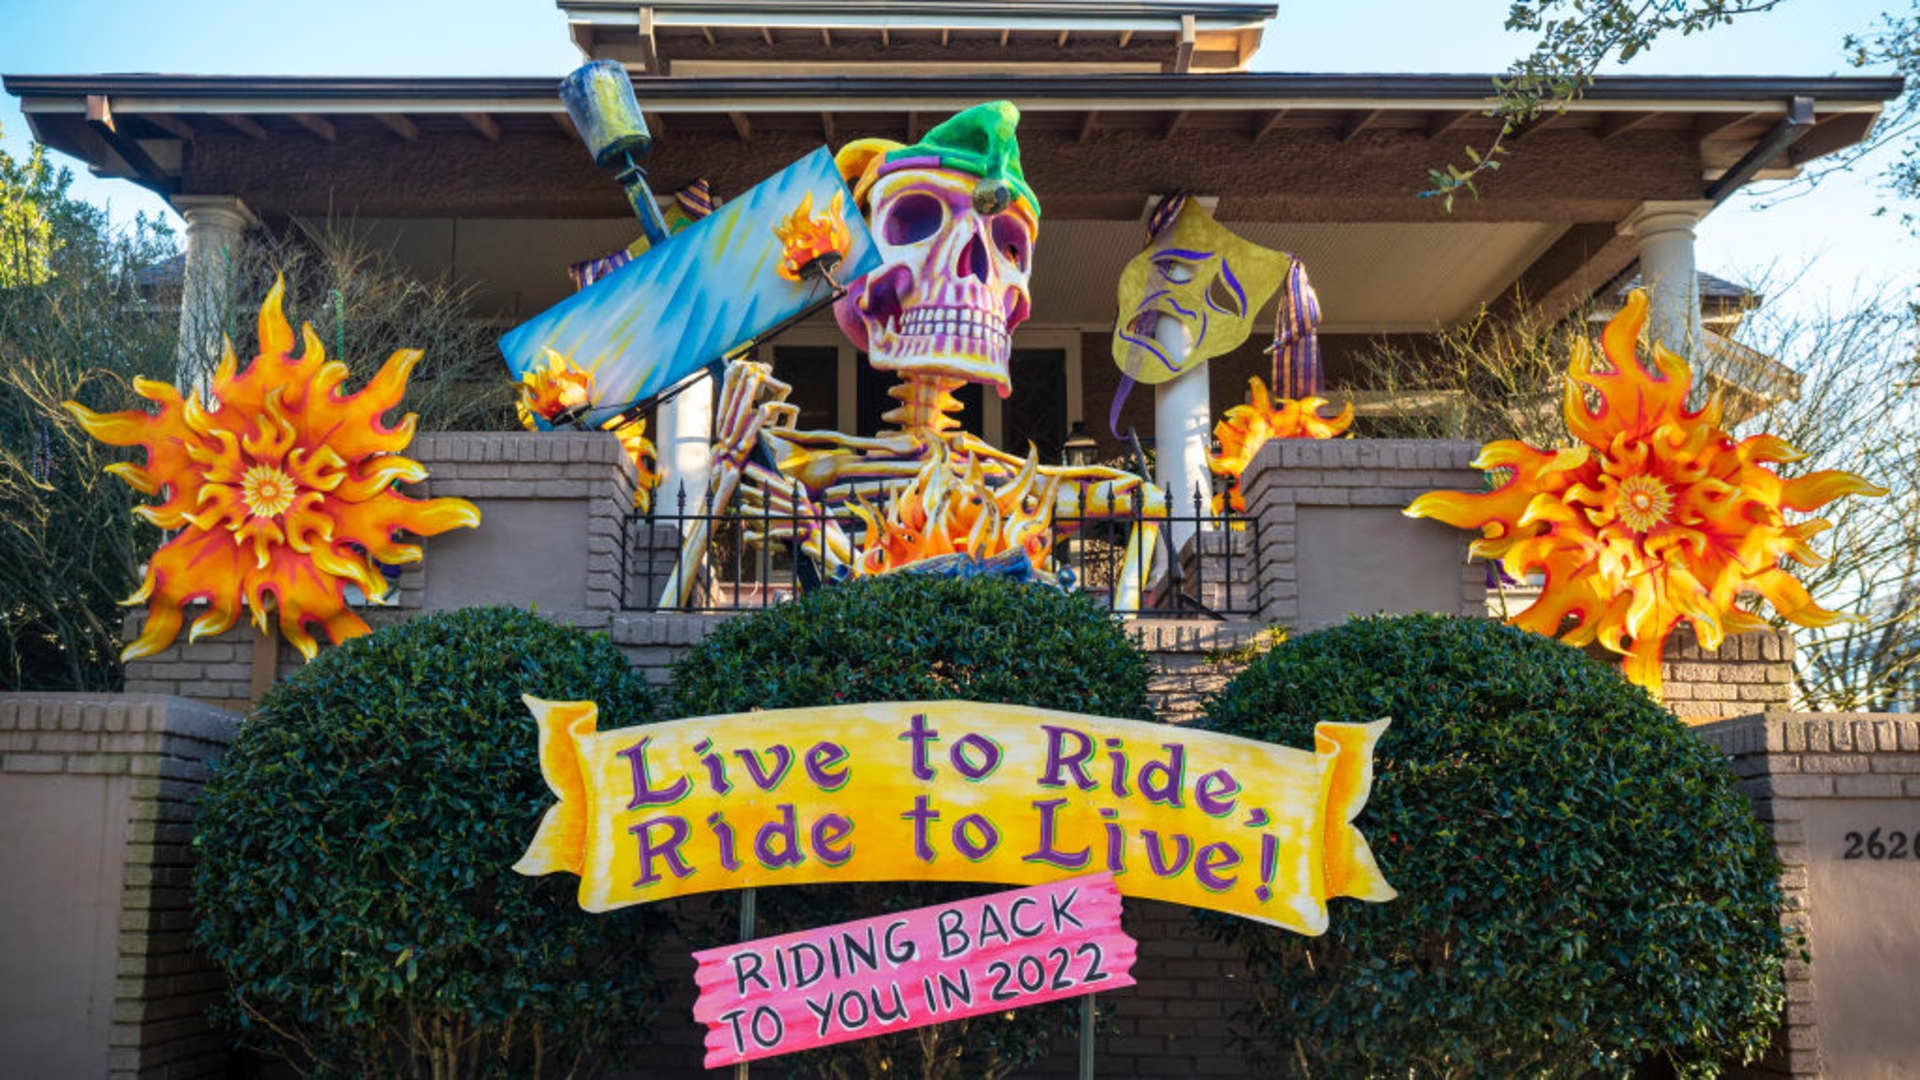 View of the Krewe d'Etat house, created by Royal Artists, on February 07, 2021 in New Orleans, Louisiana. Due to the COVID-19 pandemic cancelling traditional Mardi Gras activities, New Orleanians are decorating their homes and businesses to resemble Mardi Gras floats.